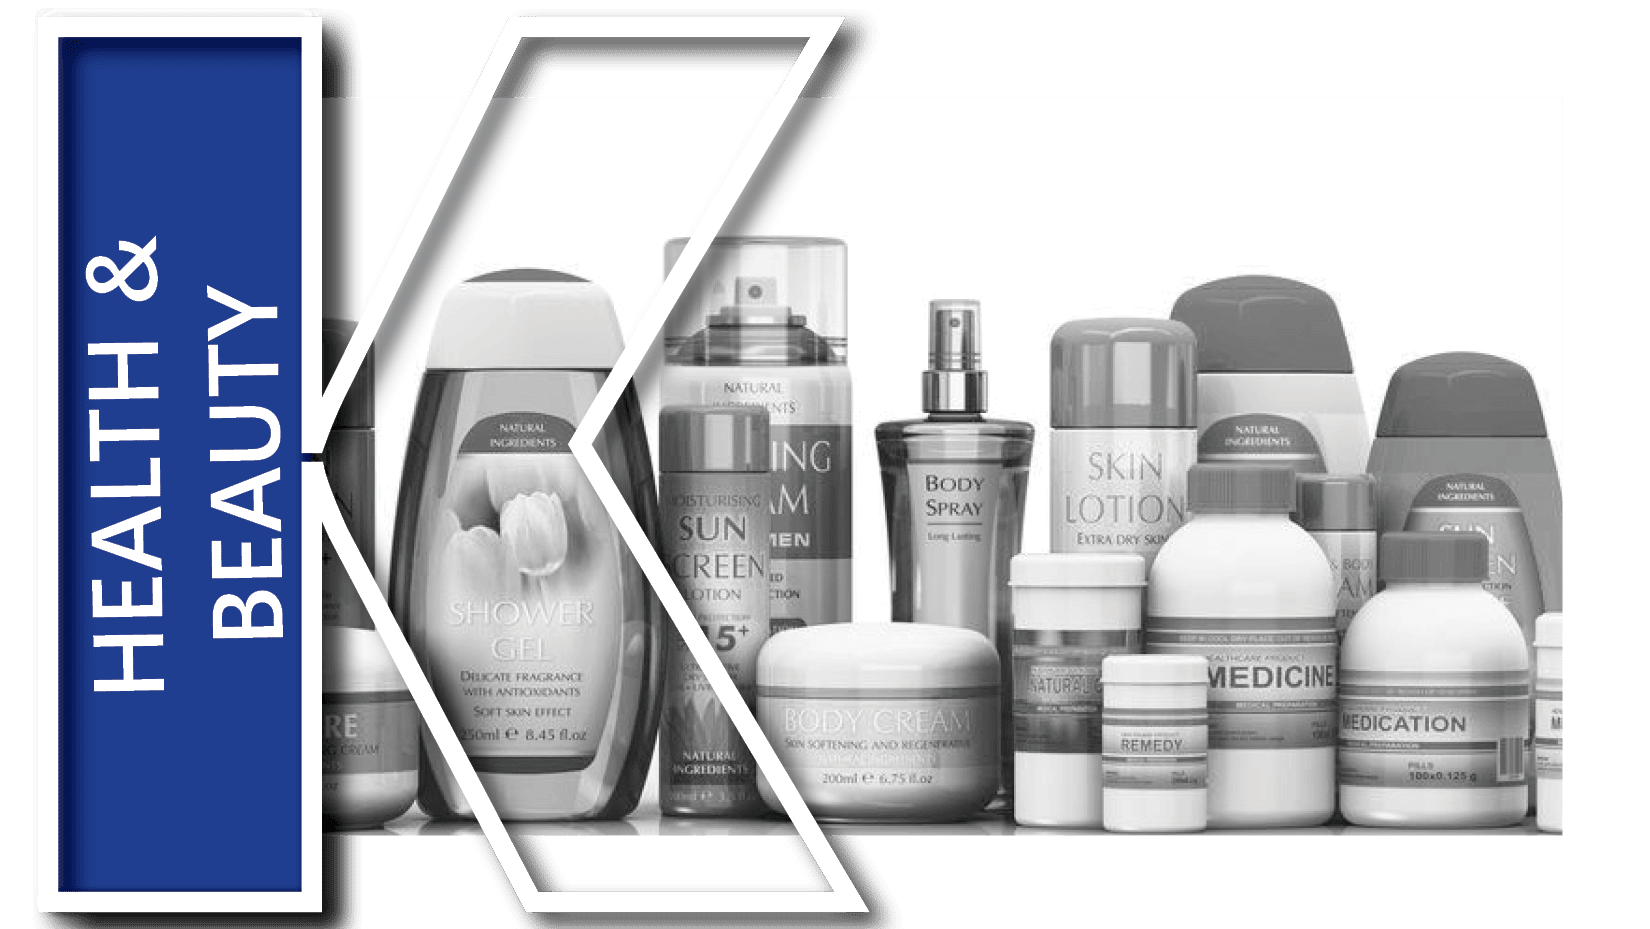 Assortment of skin care products with large K graphic and Health & Beauty in text 